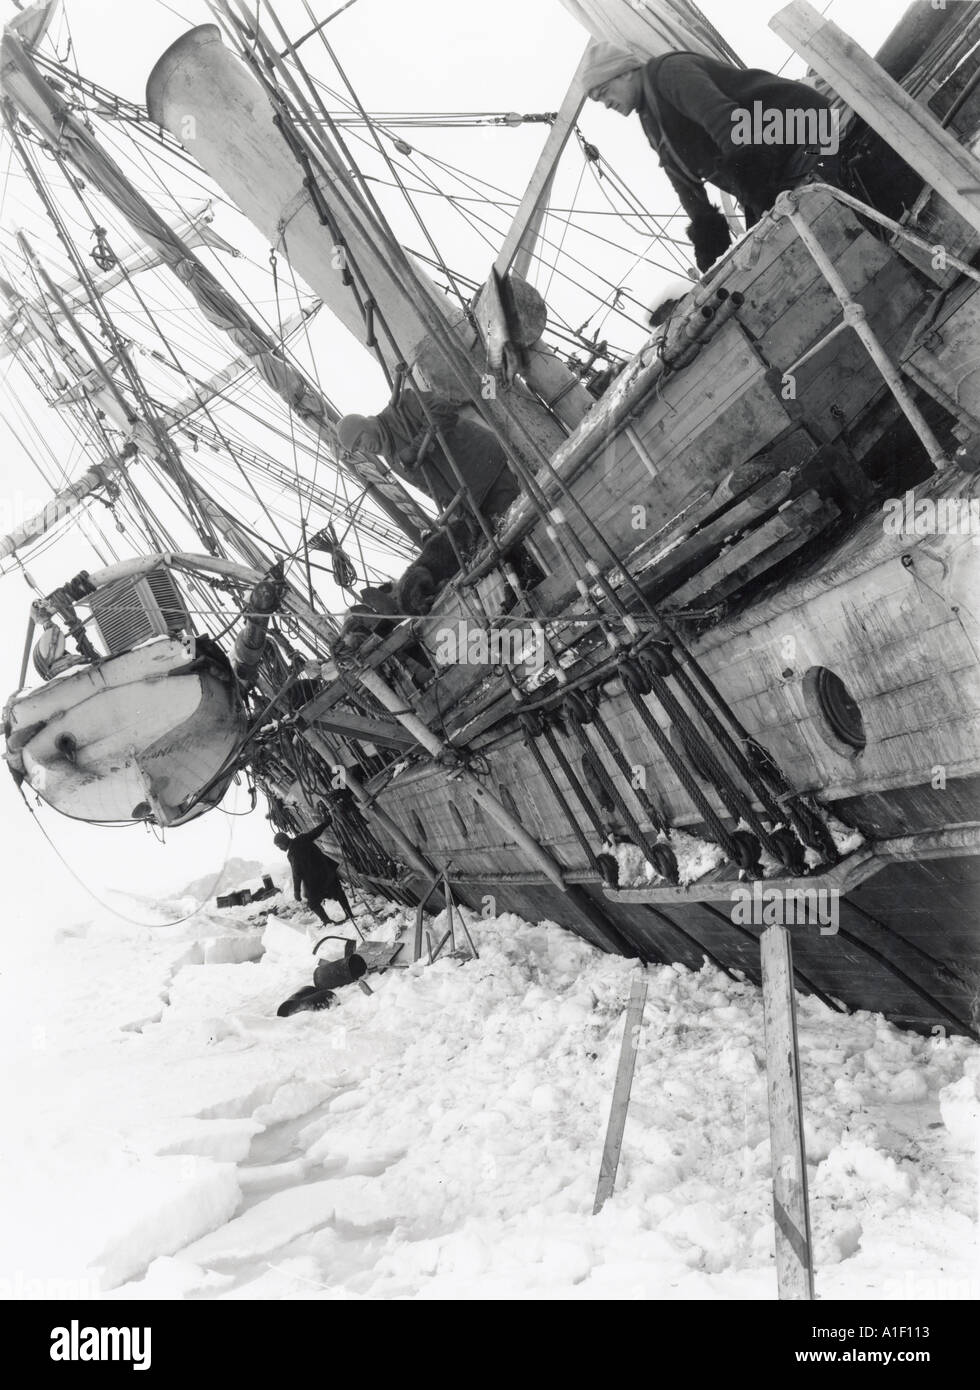 Ernest Shackleton leaning over the side of the Endurance Imperial Trans Antarctic Expedition Stock Photo